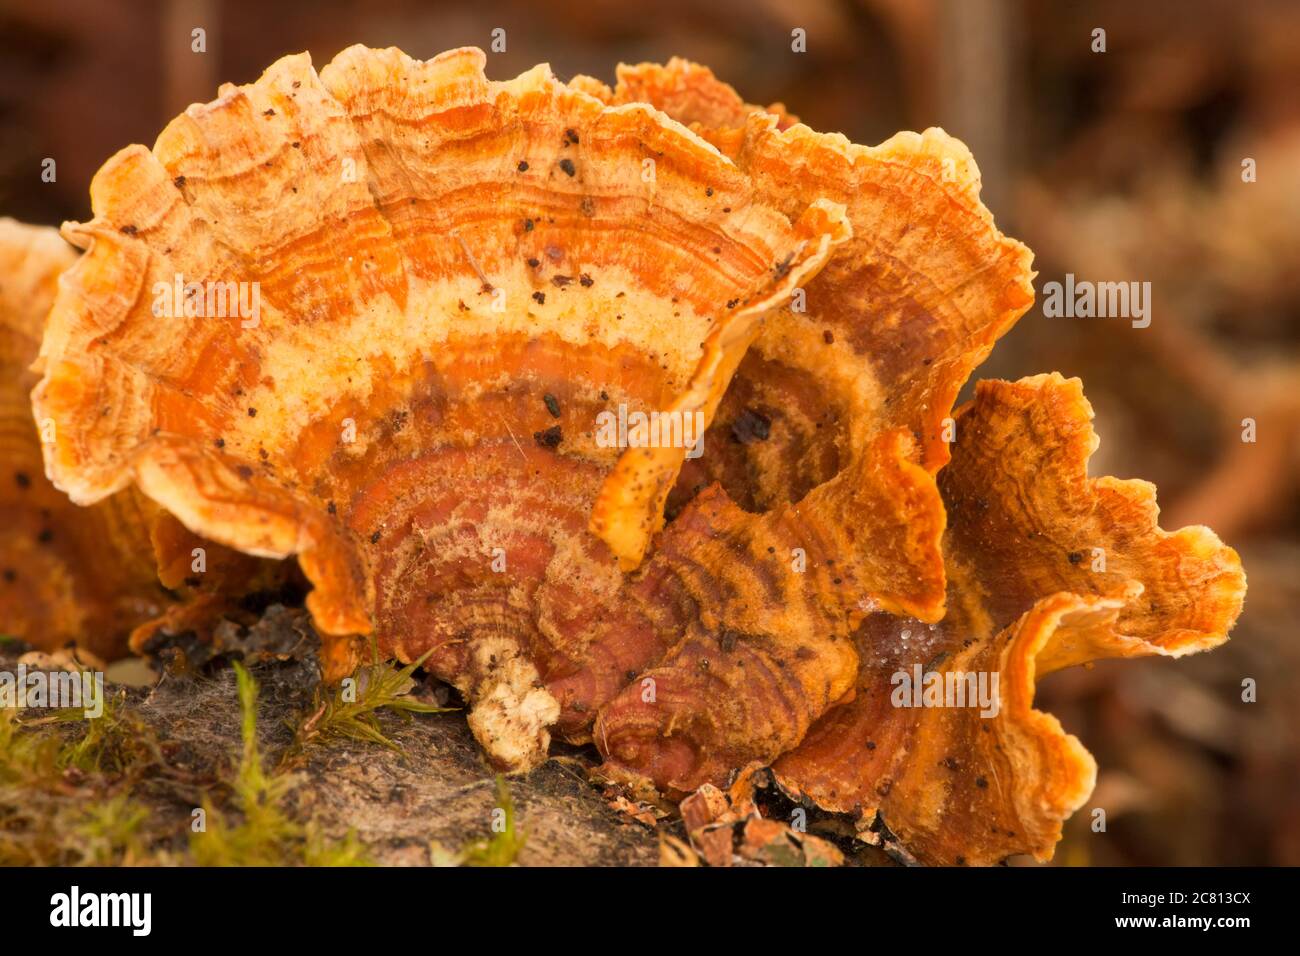 Sulfur Shelf Mushroom, a polypore also known as Chicken mushroom or Chicken of the Wood mushroom  in Mirrorwmont Park in Issaquah, WA Stock Photo